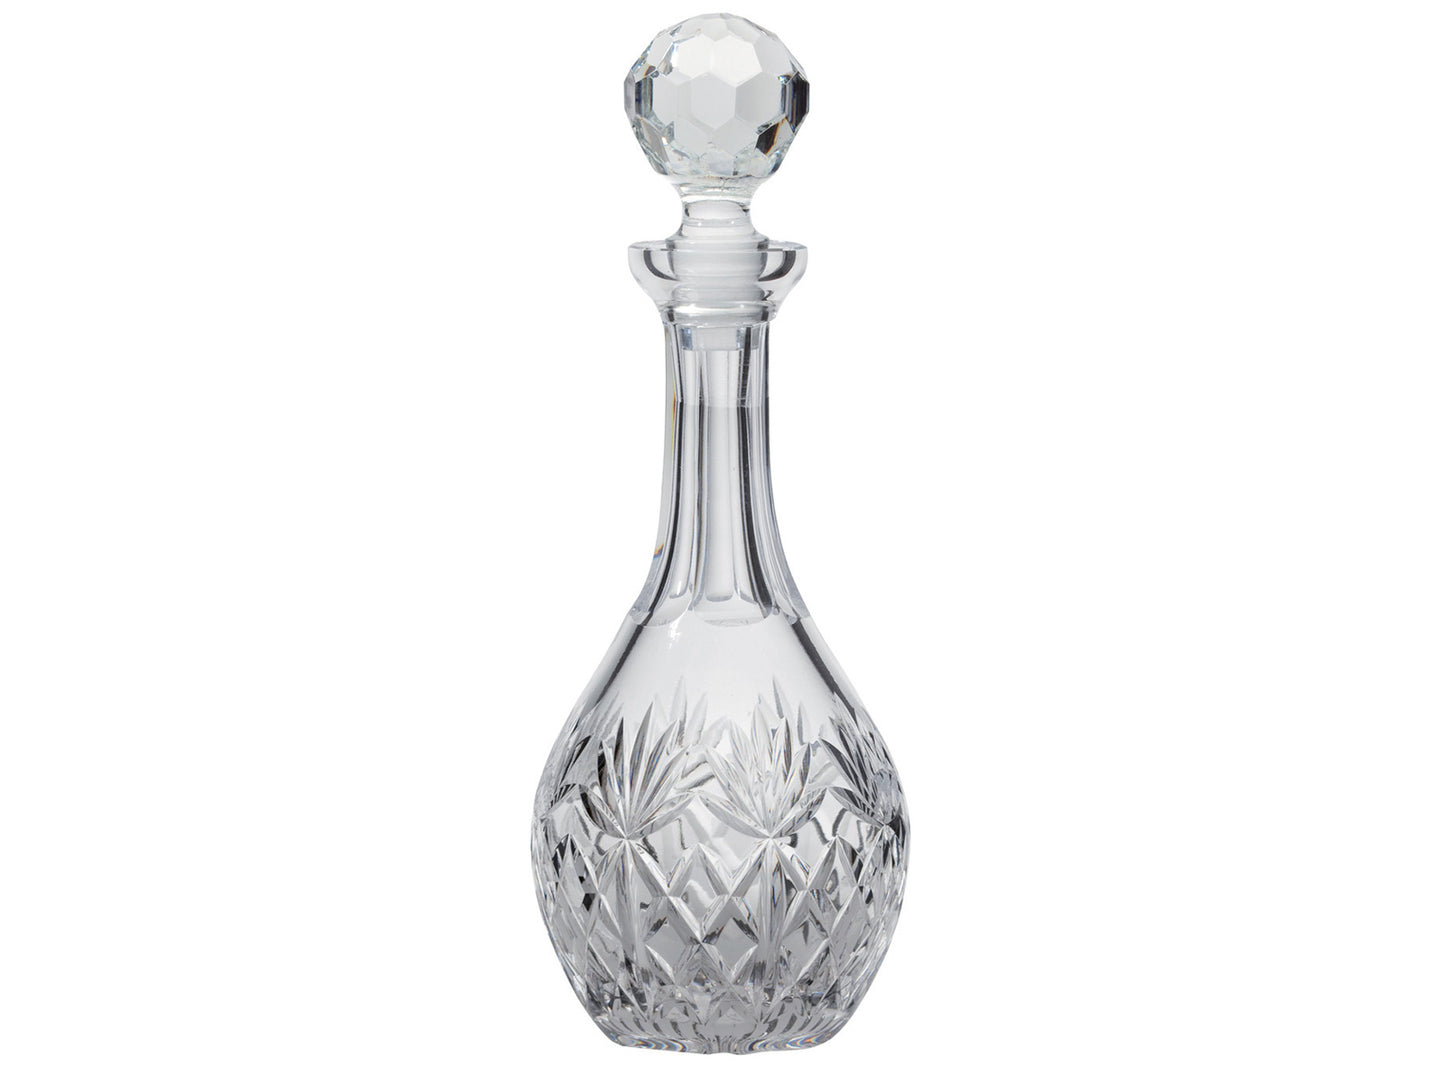 A rounded wine decanter with a slender neck and golf-ball style stopper. The decanter is cut with the Kintyre design, which has a bed of diamonds around the base with seven-pointed fans above it, with a smooth neck and rim